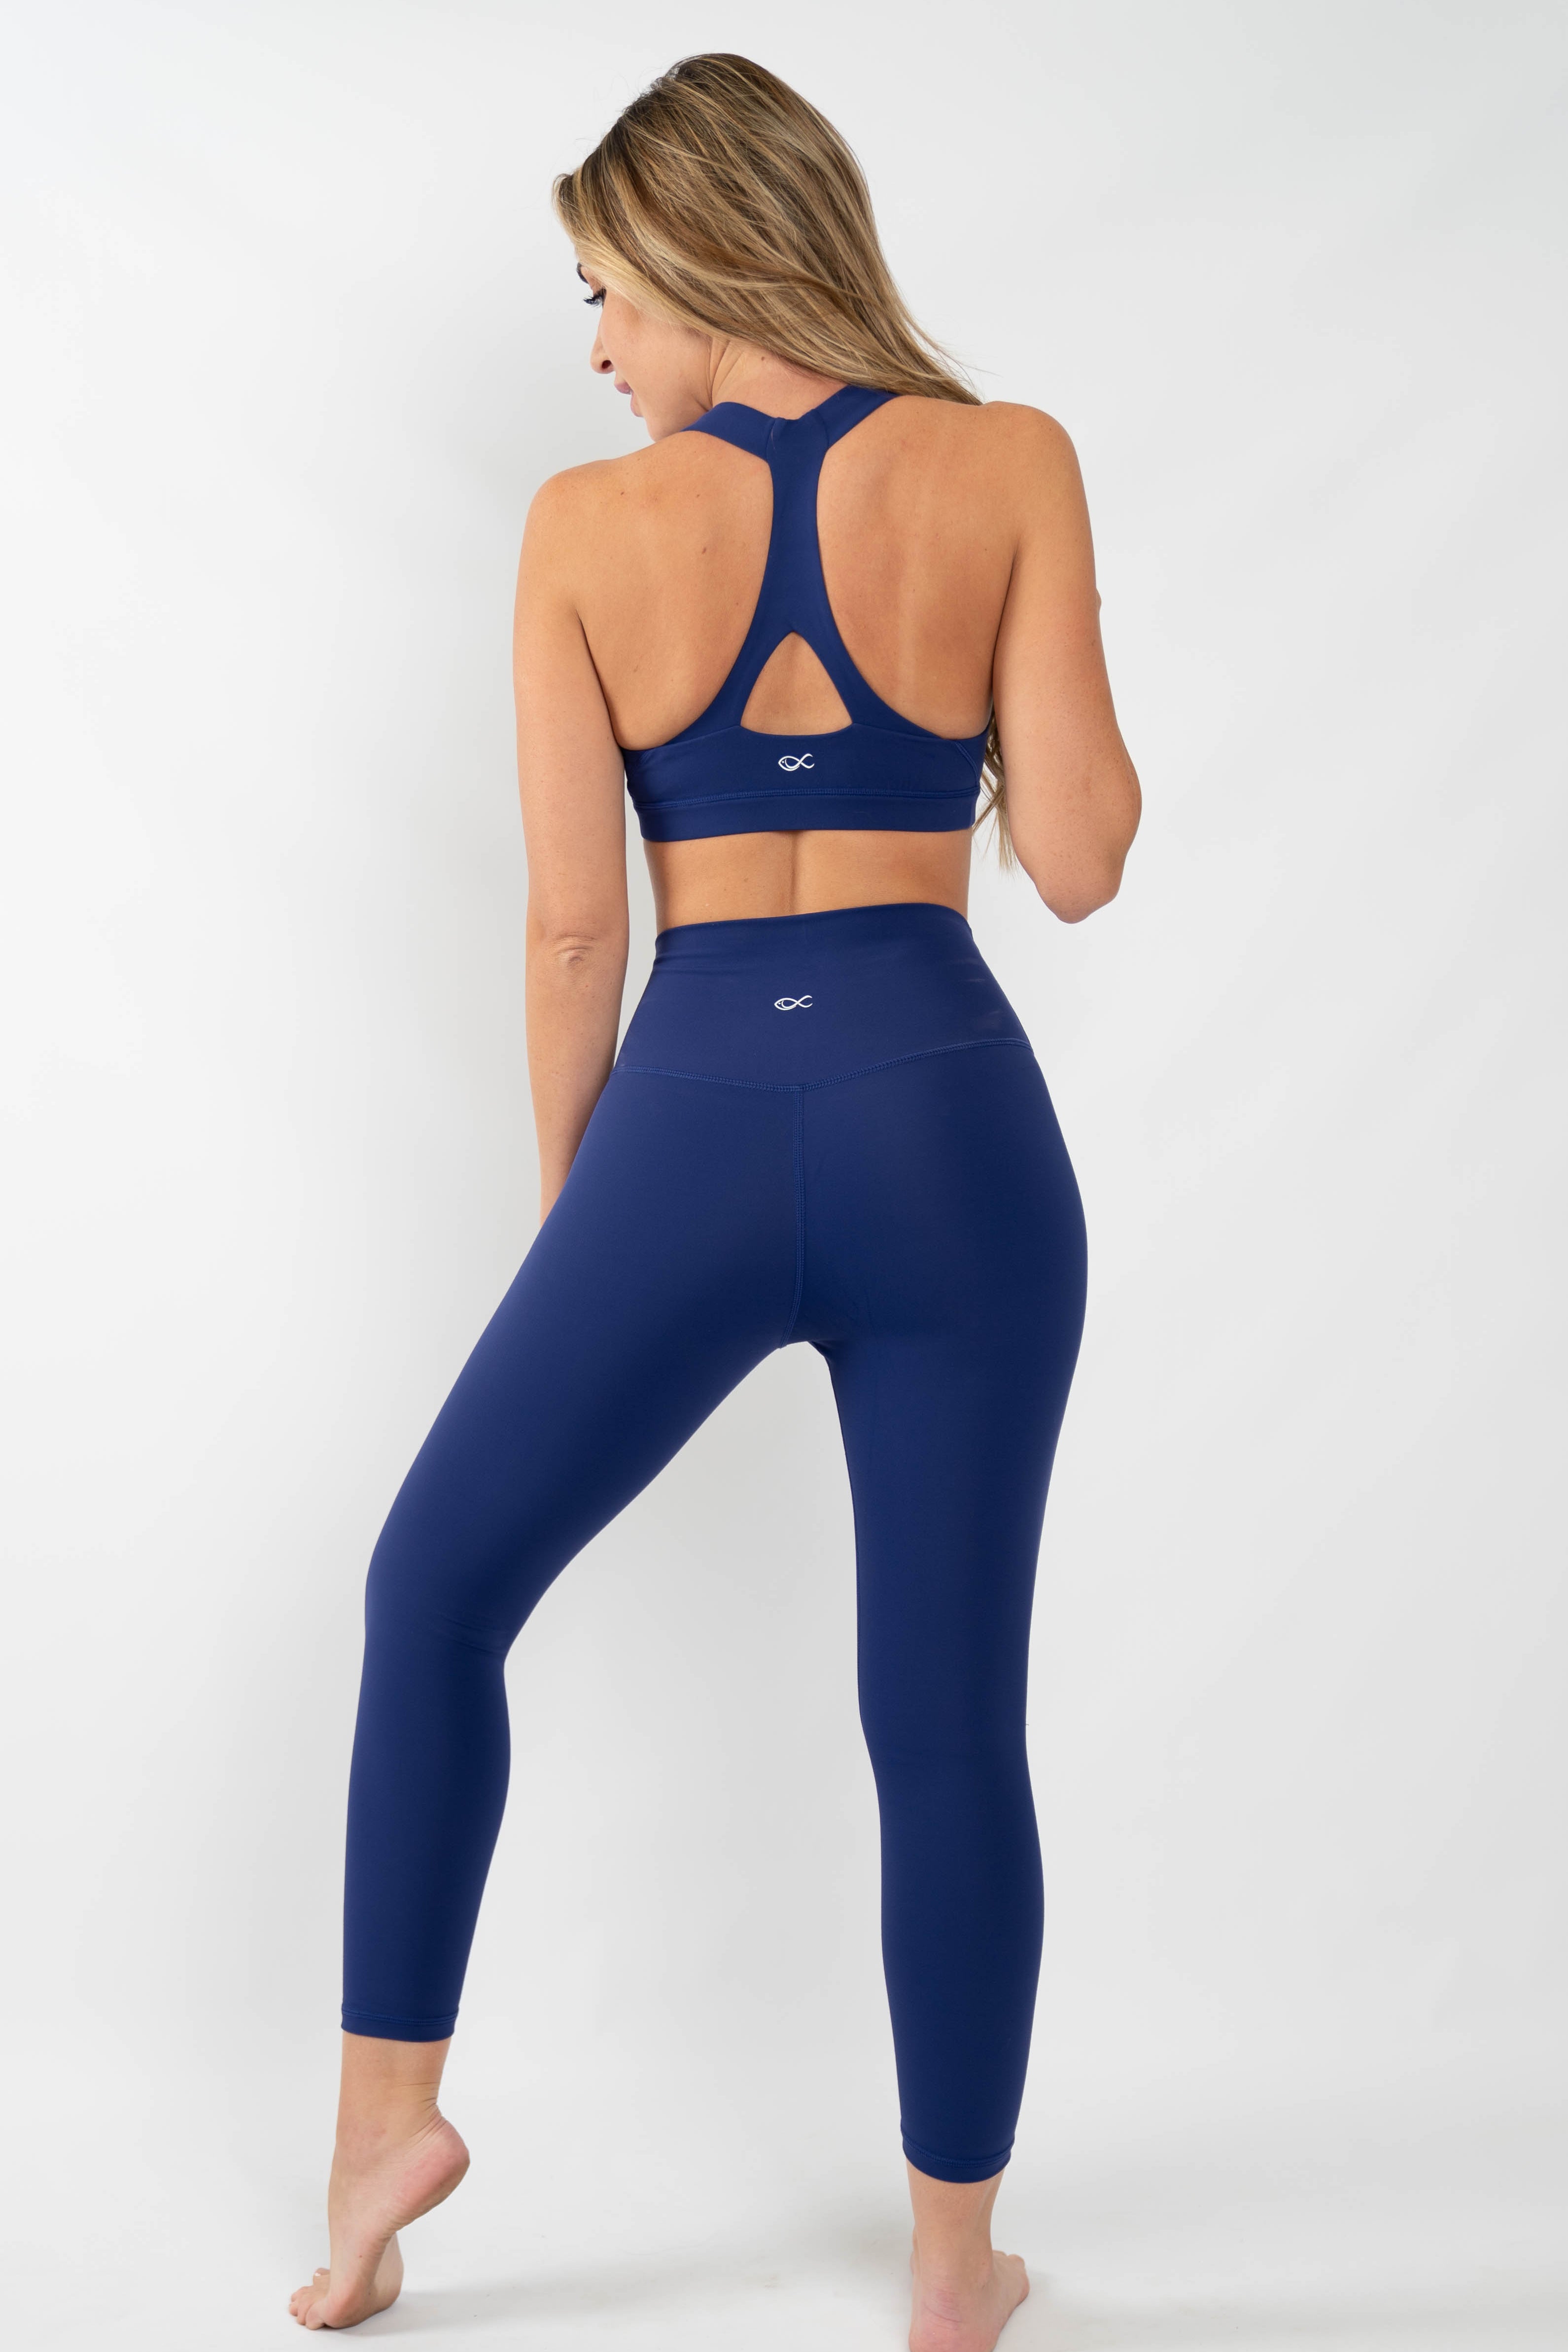 Activewear Shopping Guide, The Best Leggings, Sports Bras & More, Katie's  Bliss